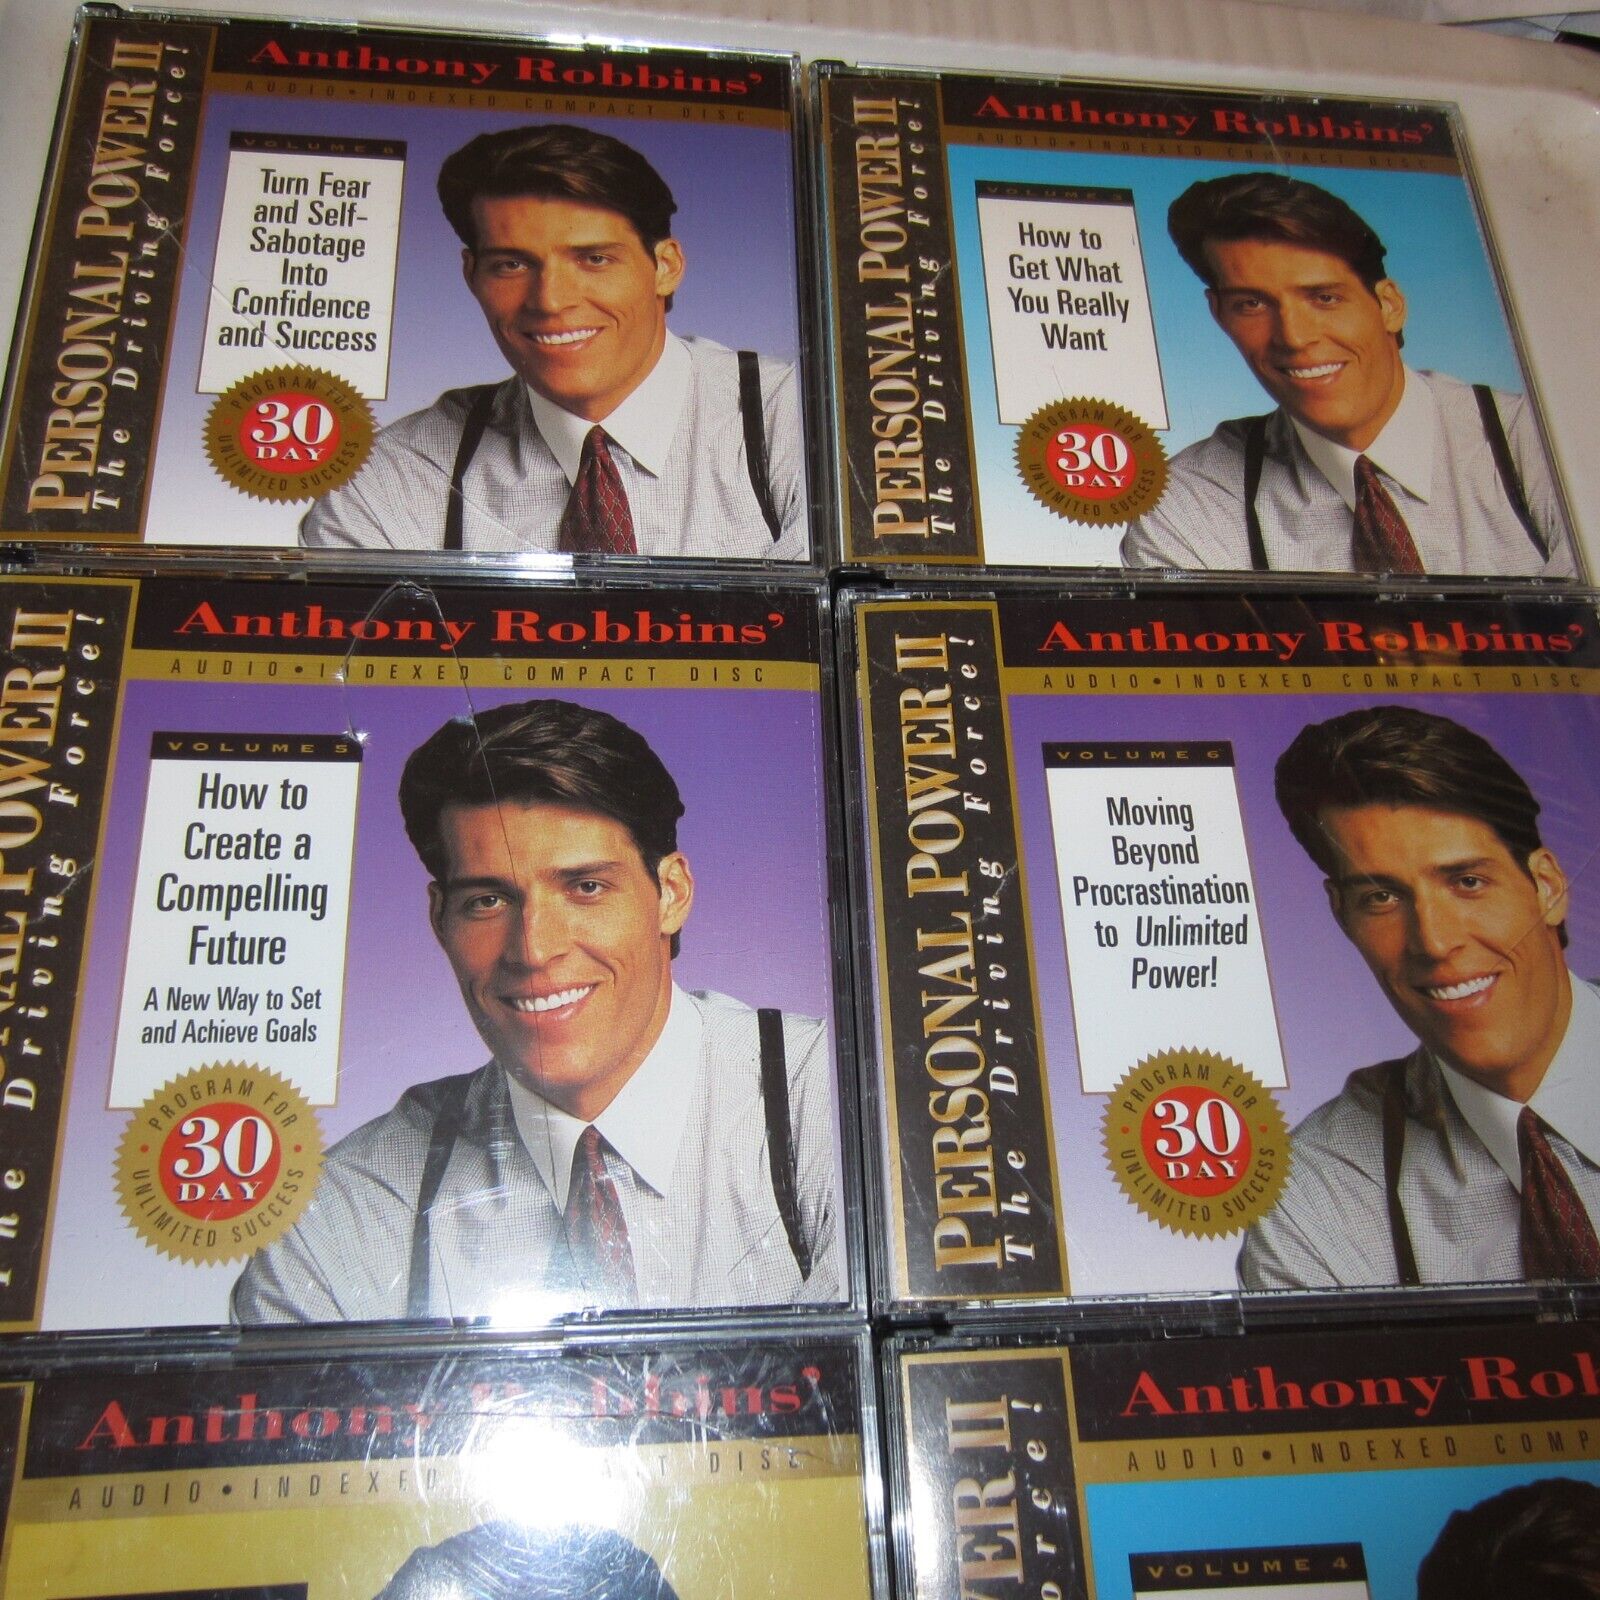 Anthony Robbins Personal Power IIDriving Force CD  1,2,,5,6,7,8,9,10.11.-18